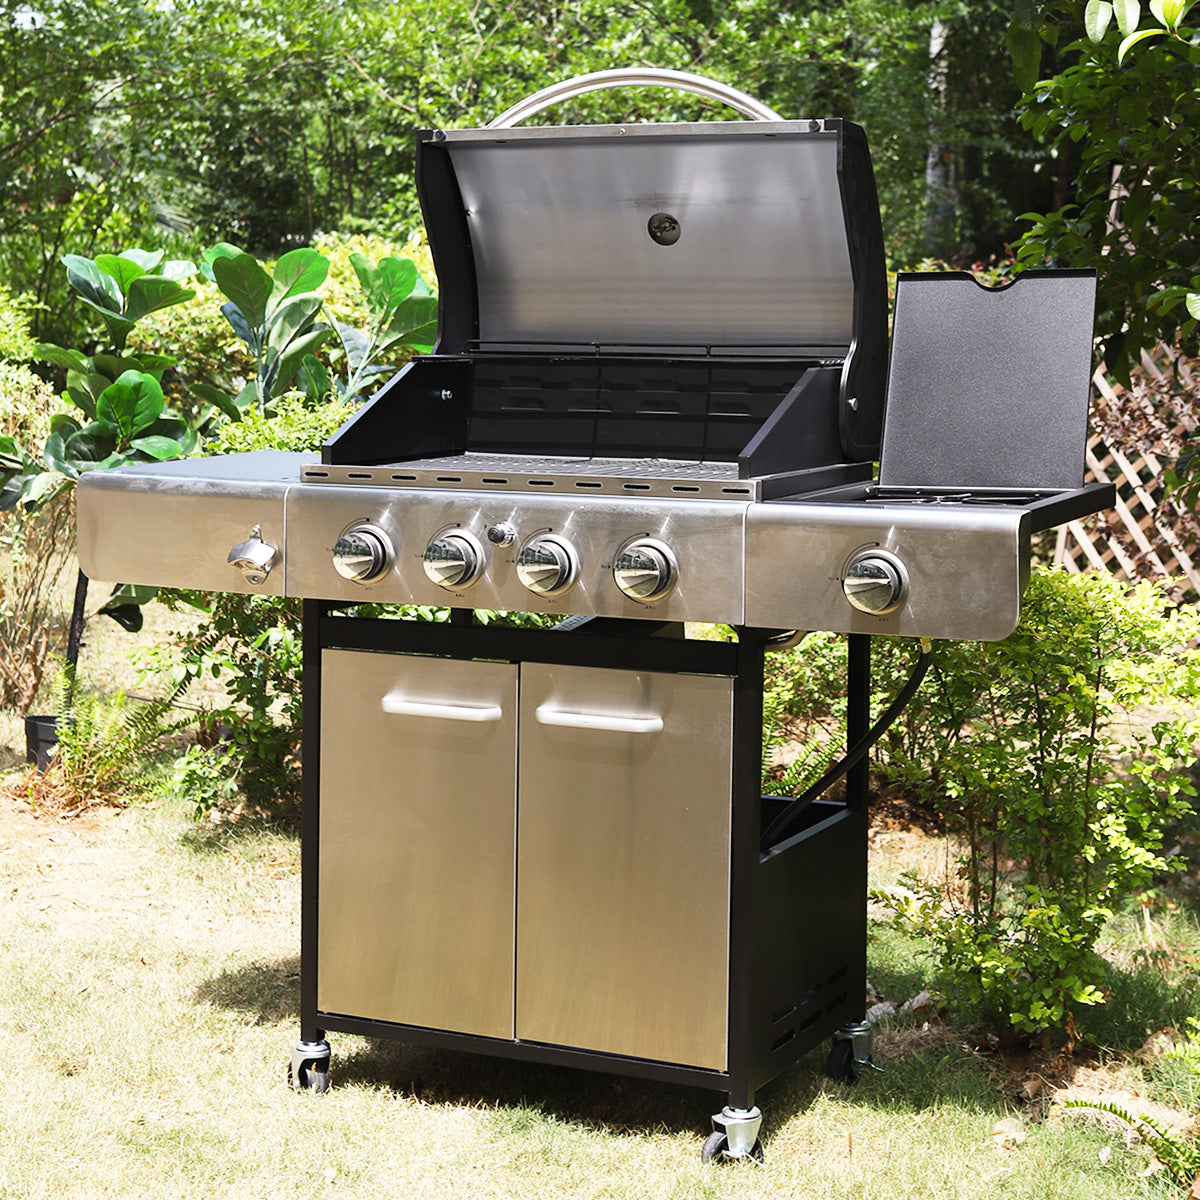 Image of Captiva Designs Patio Propane BBQ Gas Grill with 4 * 8000 BTU Grilling Burners and 10,000 Side Burner